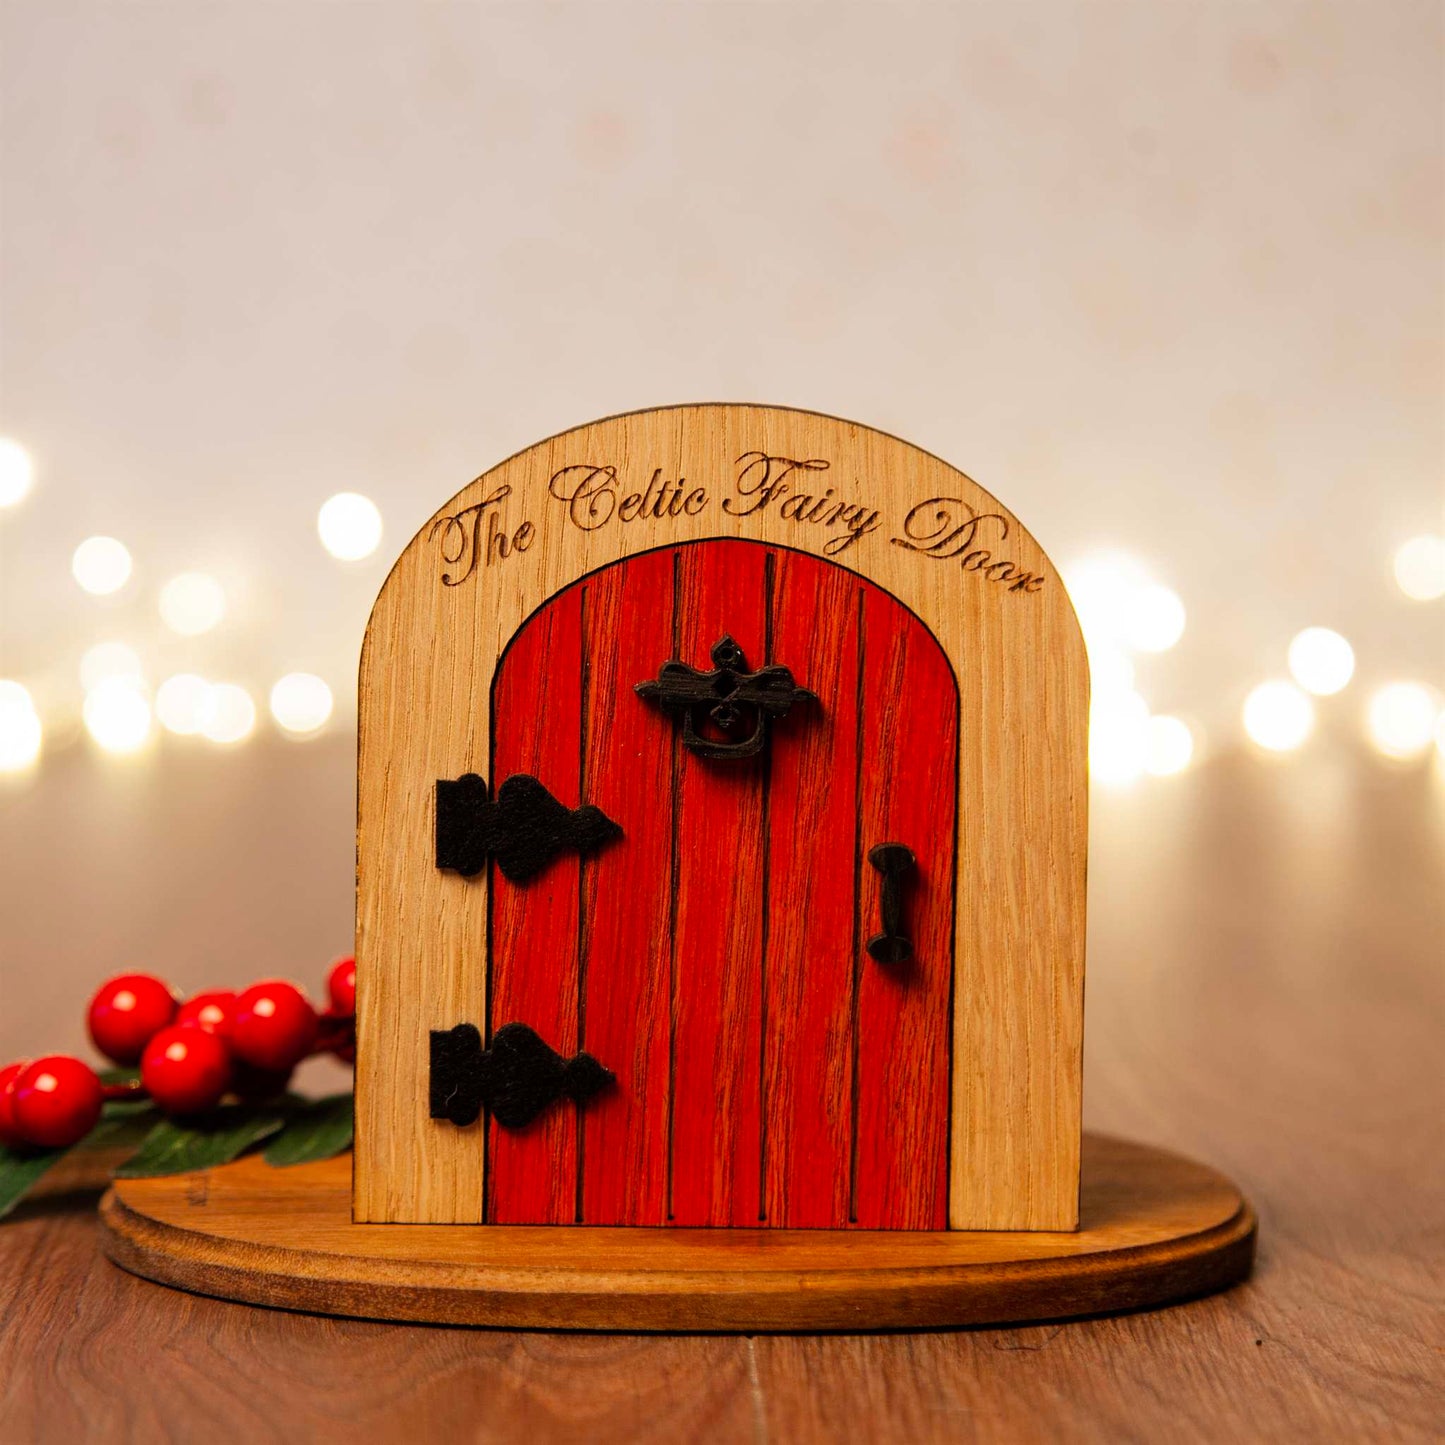 Caulfield Country Boards Homewares The Folklore Collection Fairy Doors - Irish Fairy